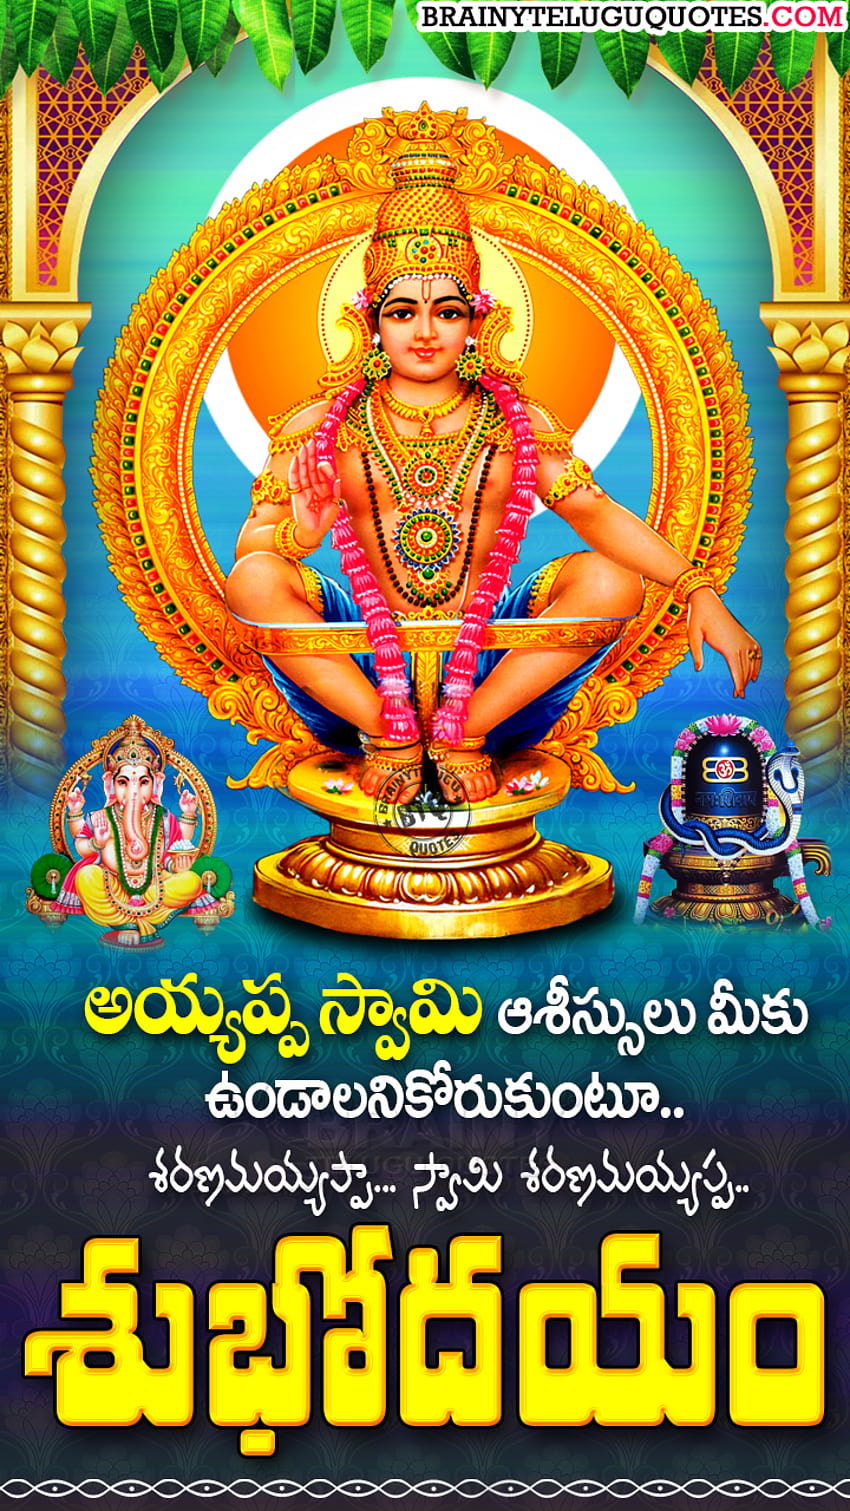 Telugu good morning quotes HD wallpapers | Pxfuel